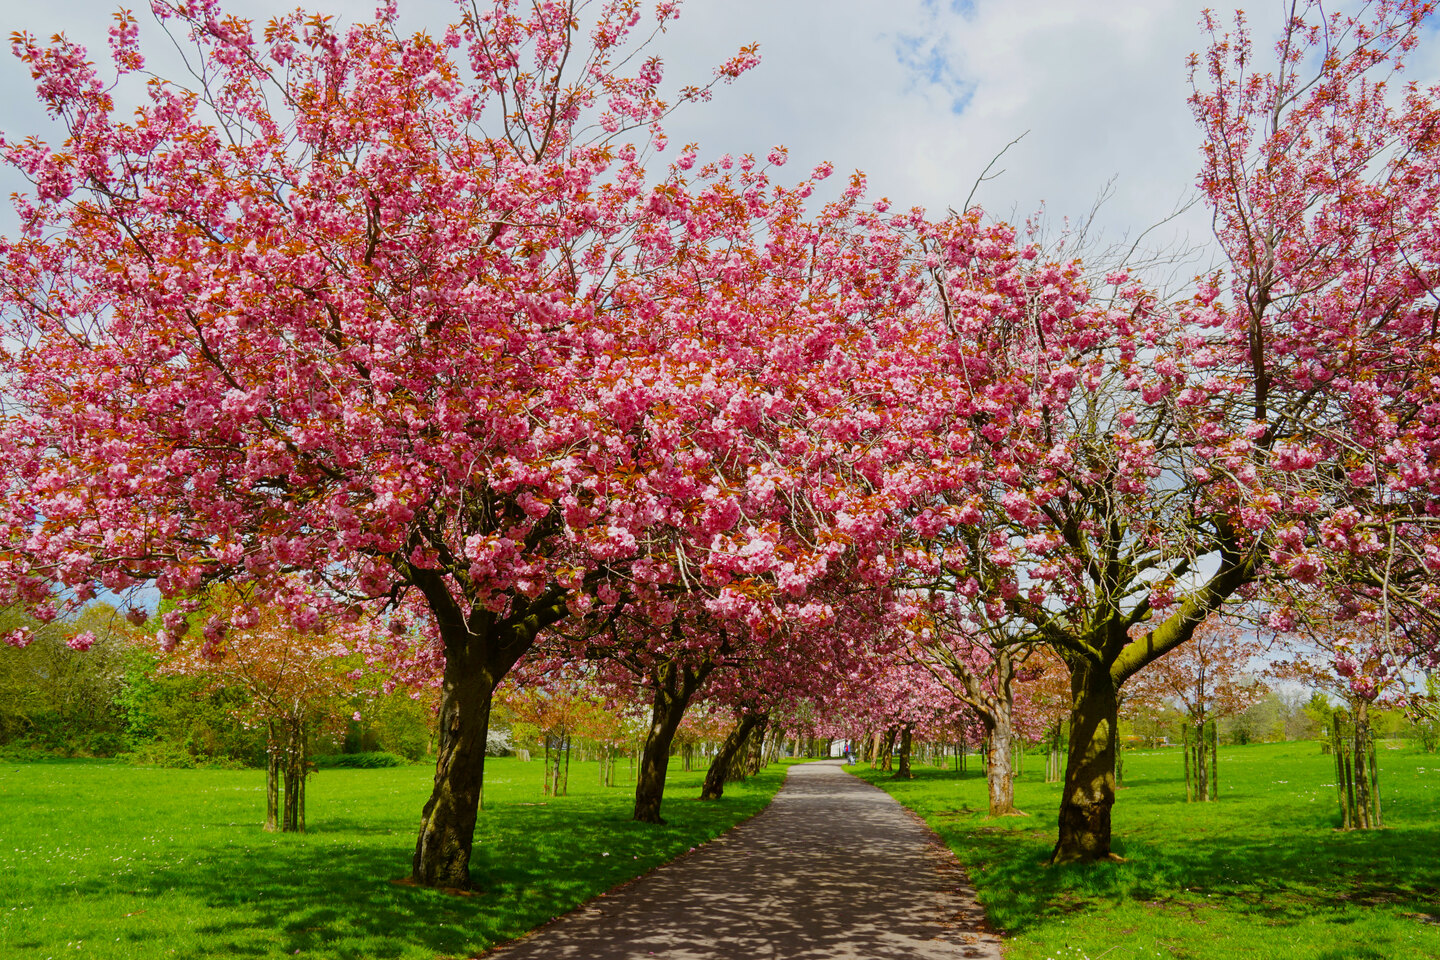 Student Accommodation in Wavertree - blossom trees surrounding a path in Wavertree Botanic Gardens